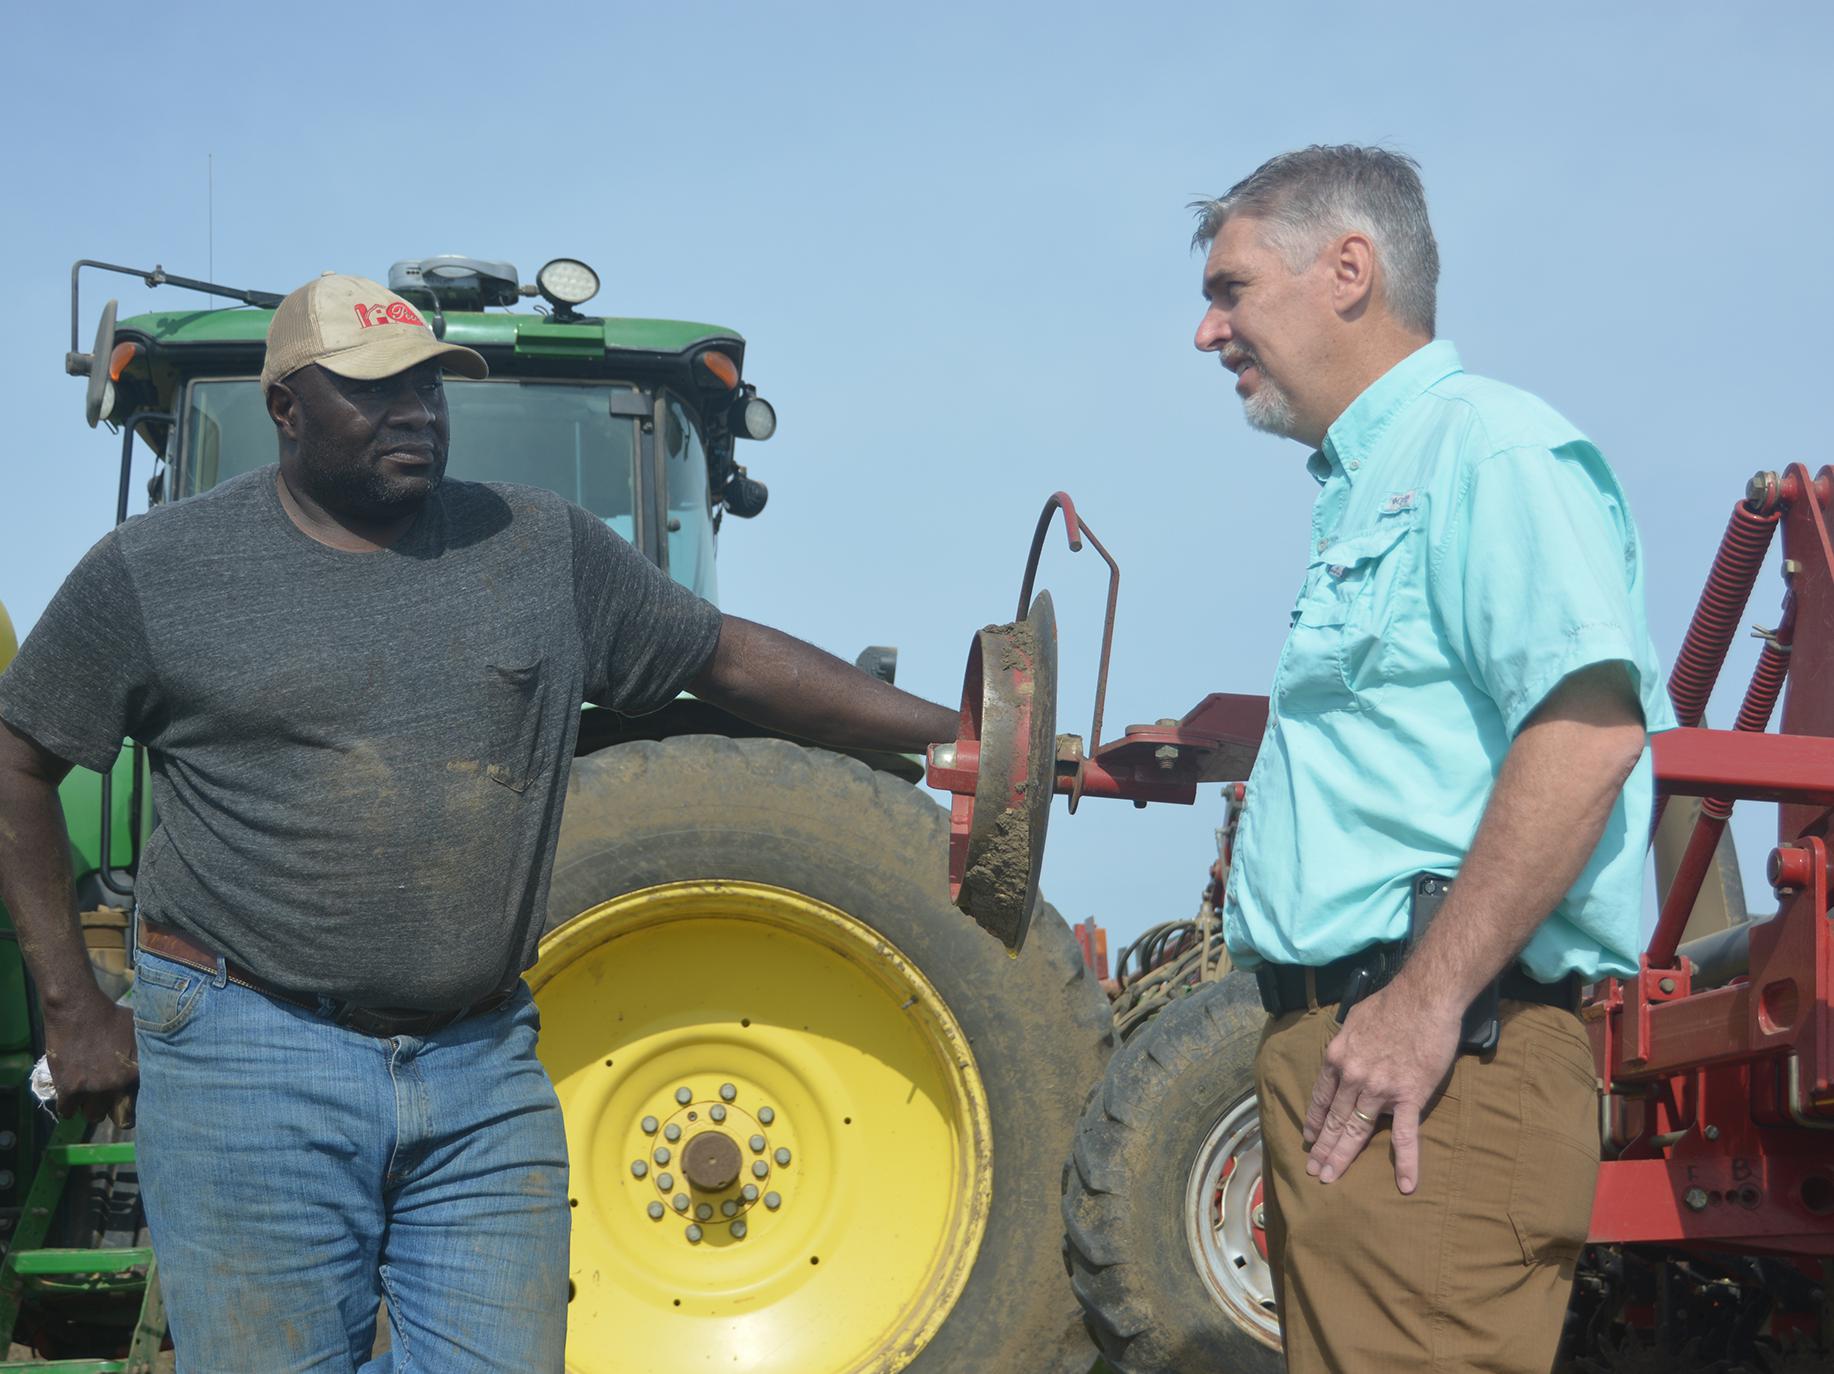 Two men facing each other in conversation and standing beside a tractor and equipment with a clear, blue sky overhead.